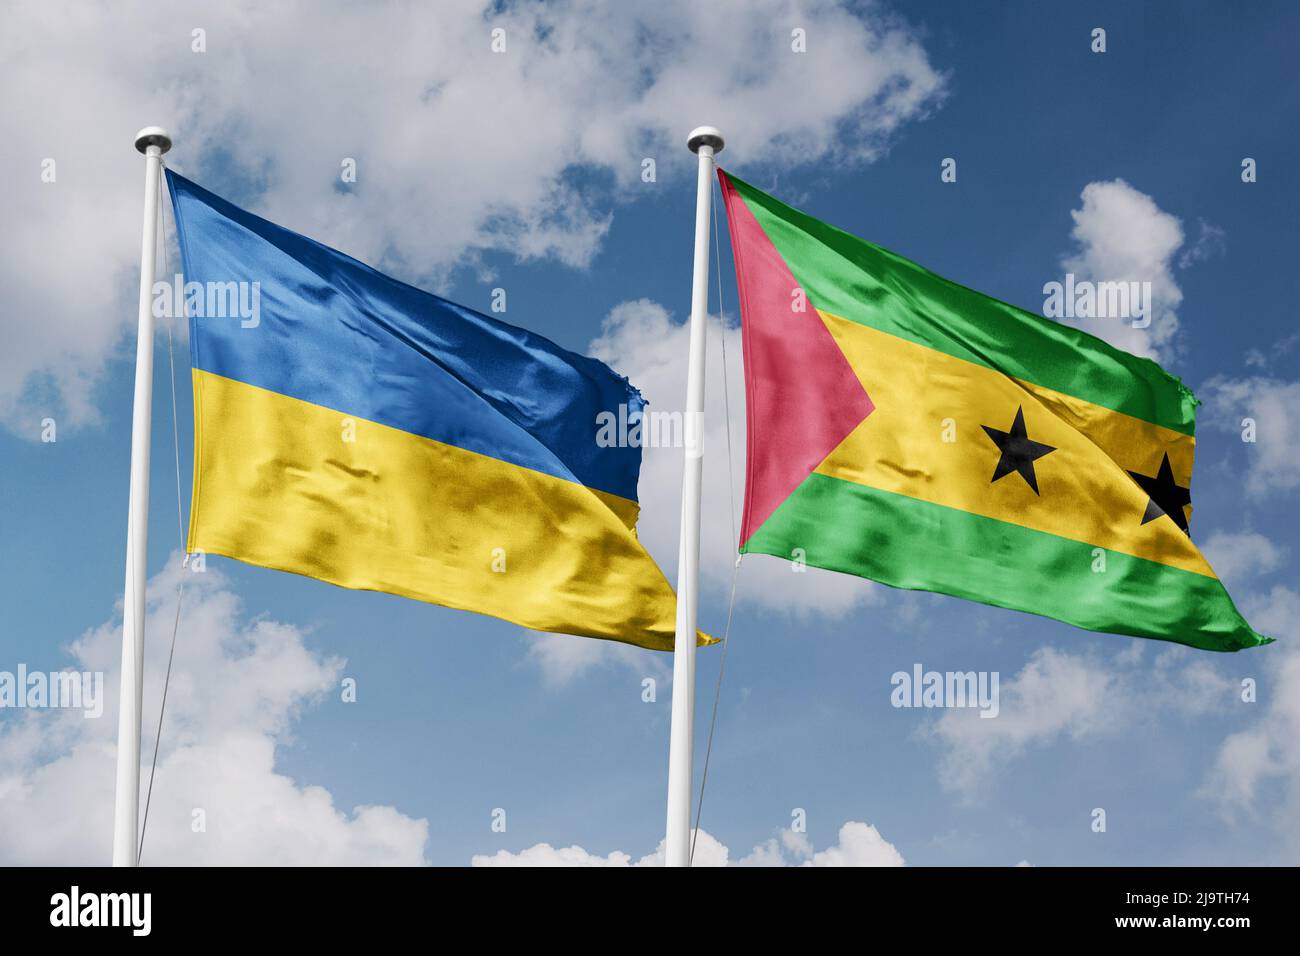 Ukraine and Sao Tome and Principe two flags on flagpoles and blue cloudy sky background Stock Photo